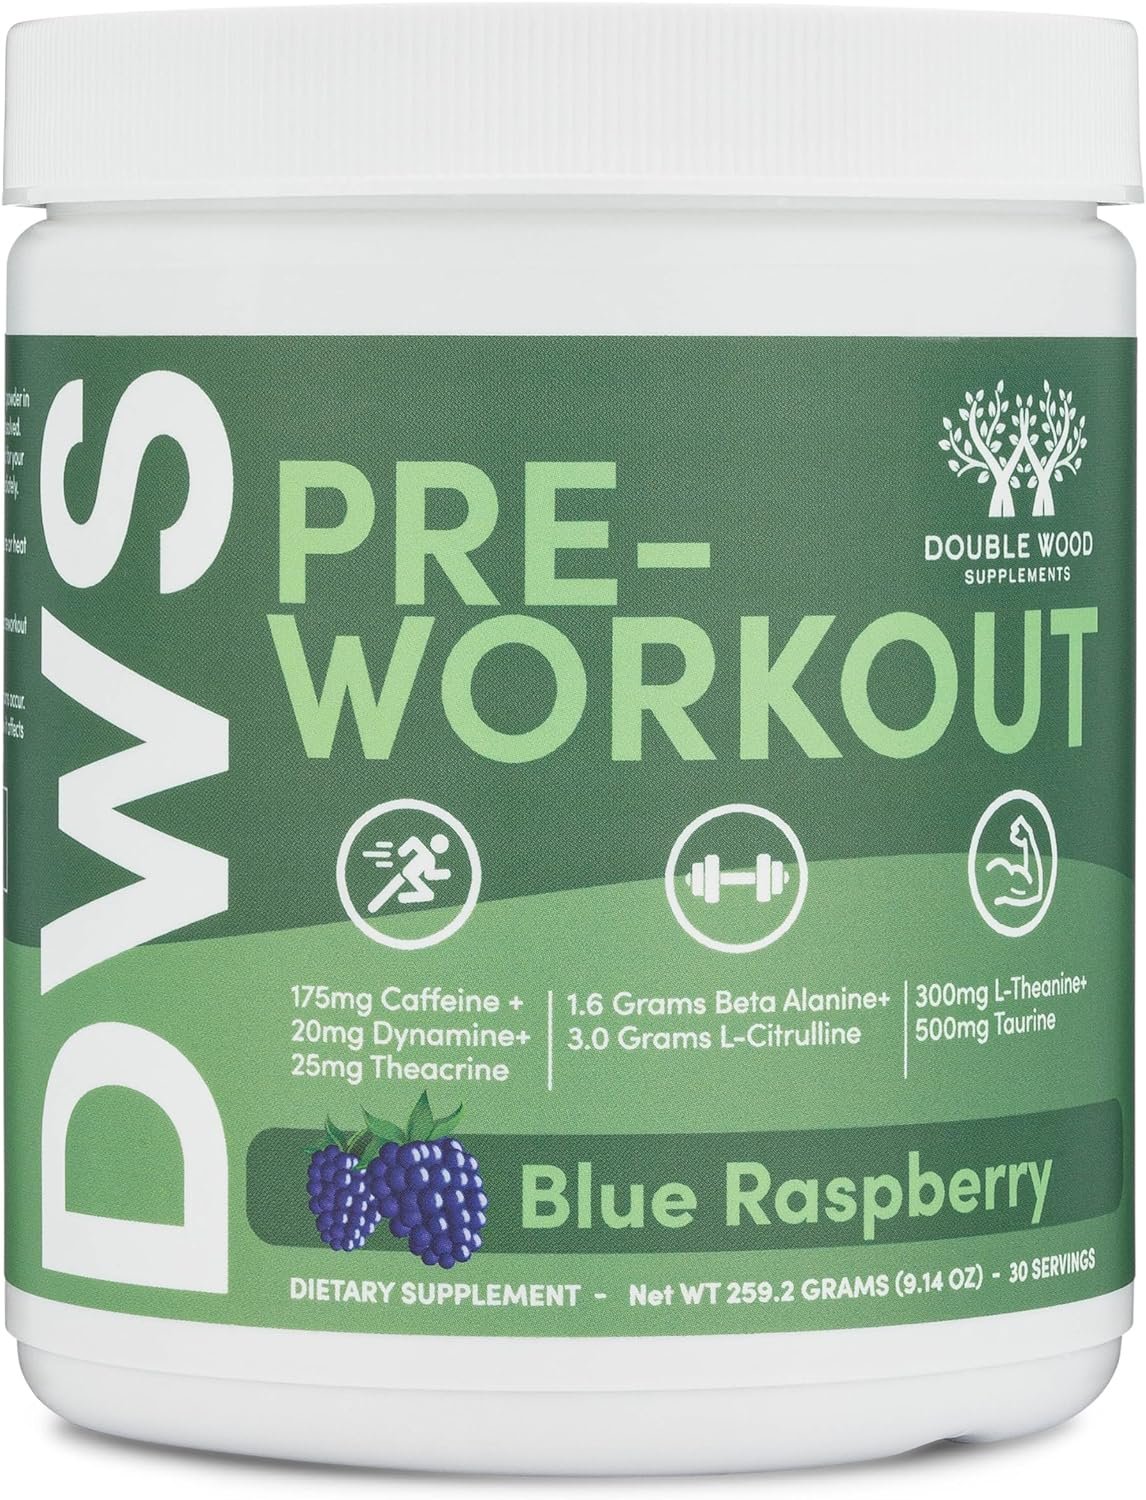 Double Wood Pre Workout Powder Review